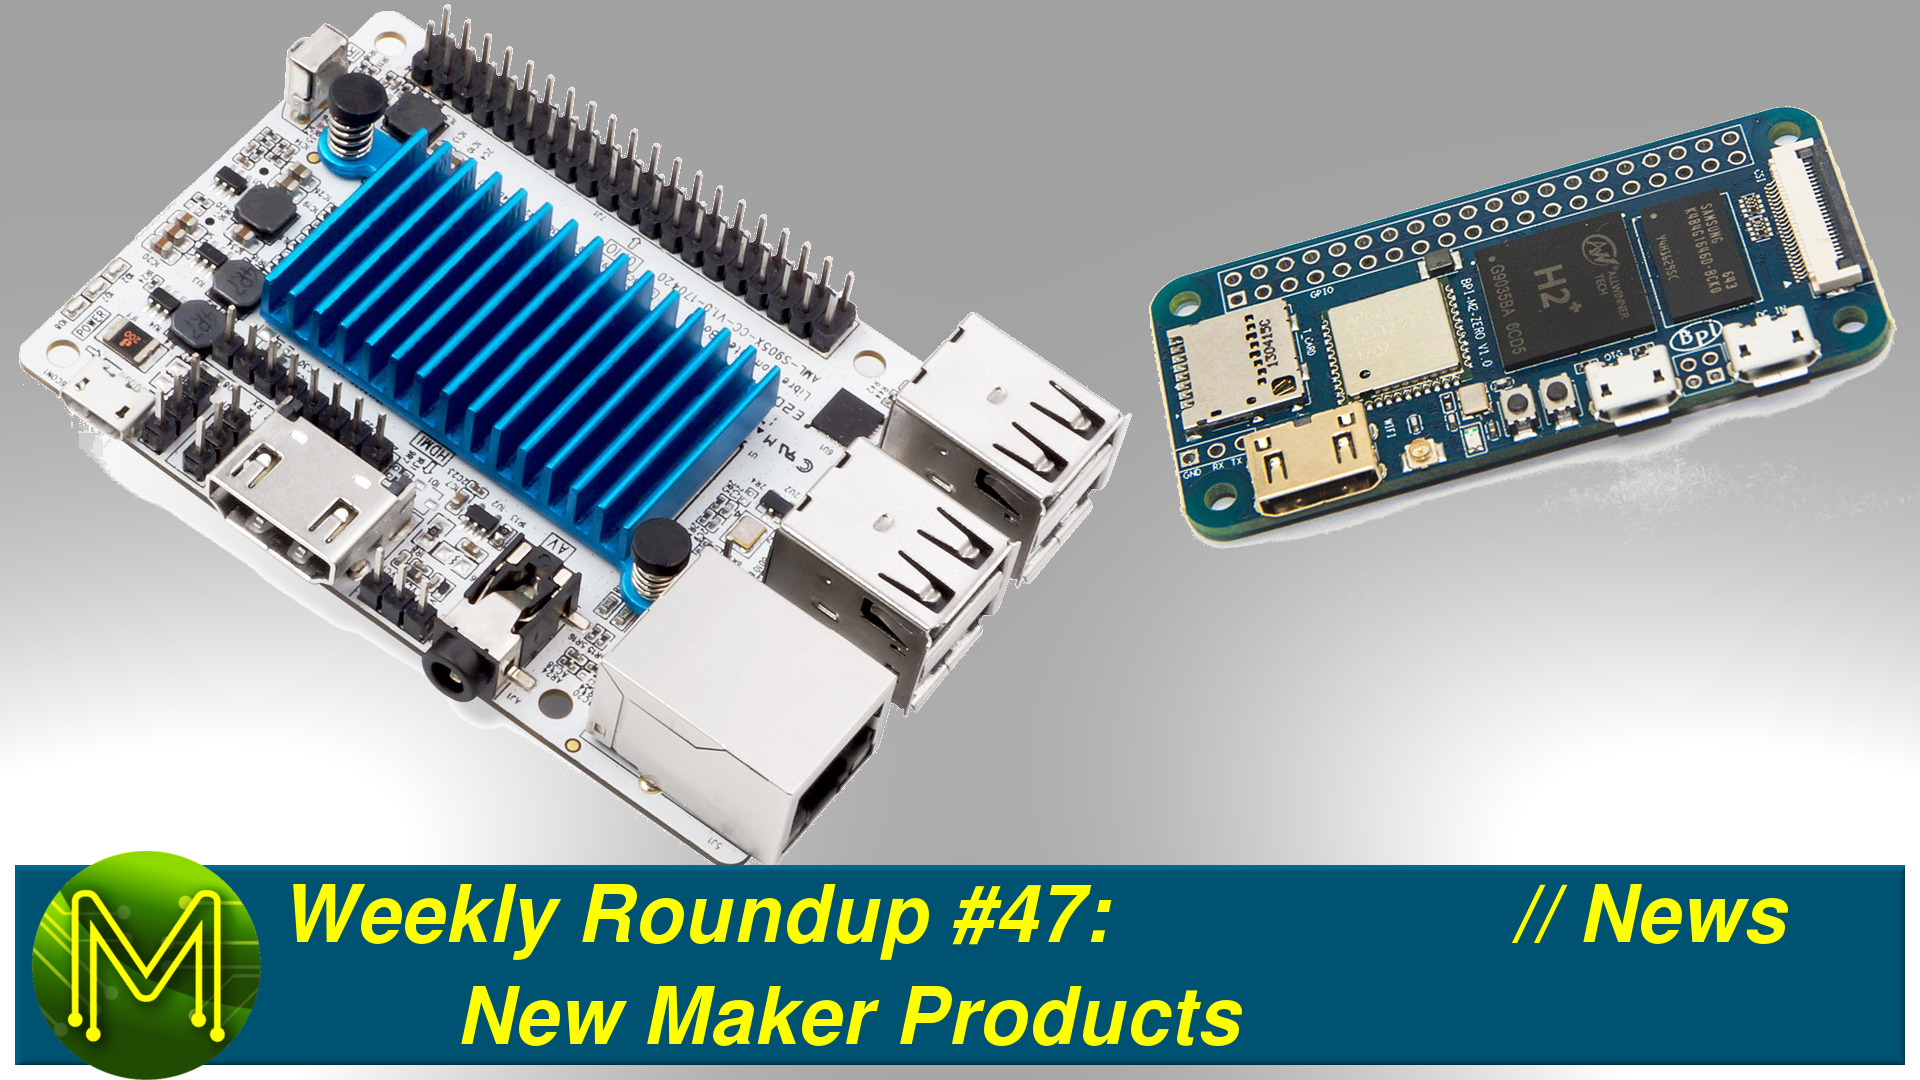 Weekly Roundup #47 - New Maker Products // News